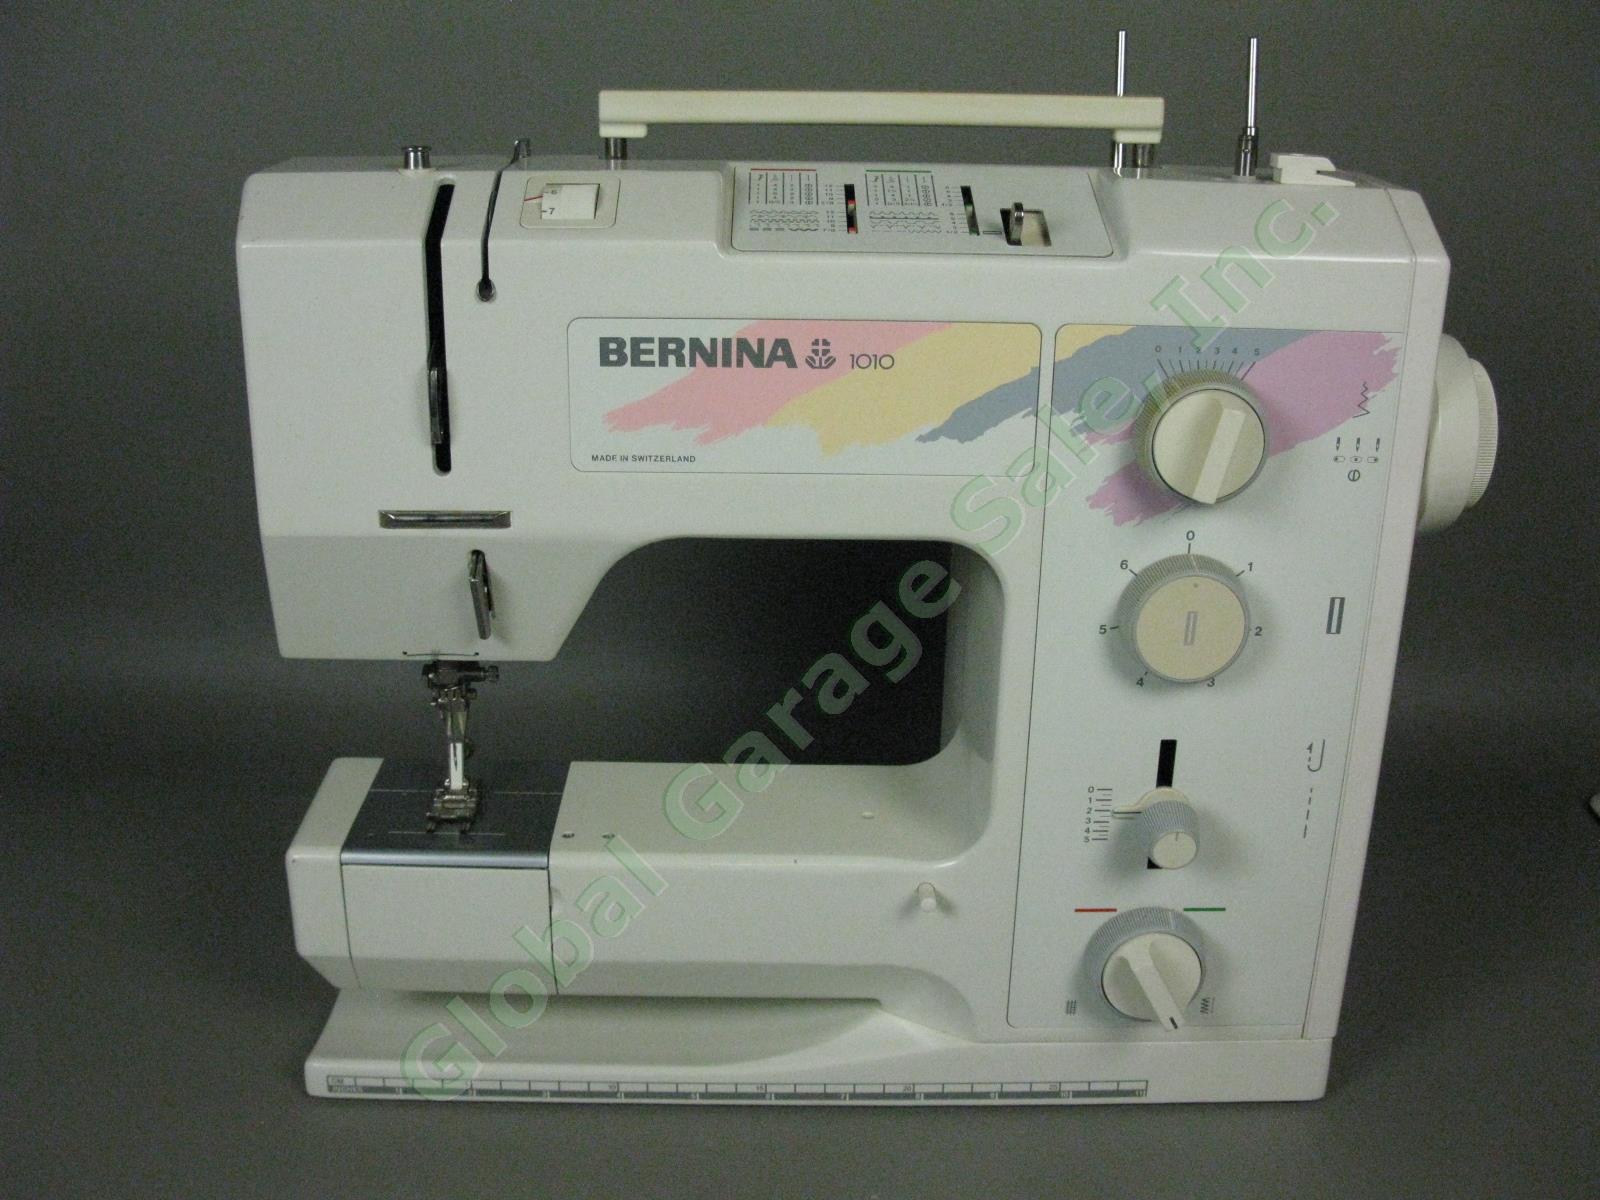 Bernina 1010 Sewing Machine w/Slide-On Extension Table Pedal Feet Manual Cover + 1